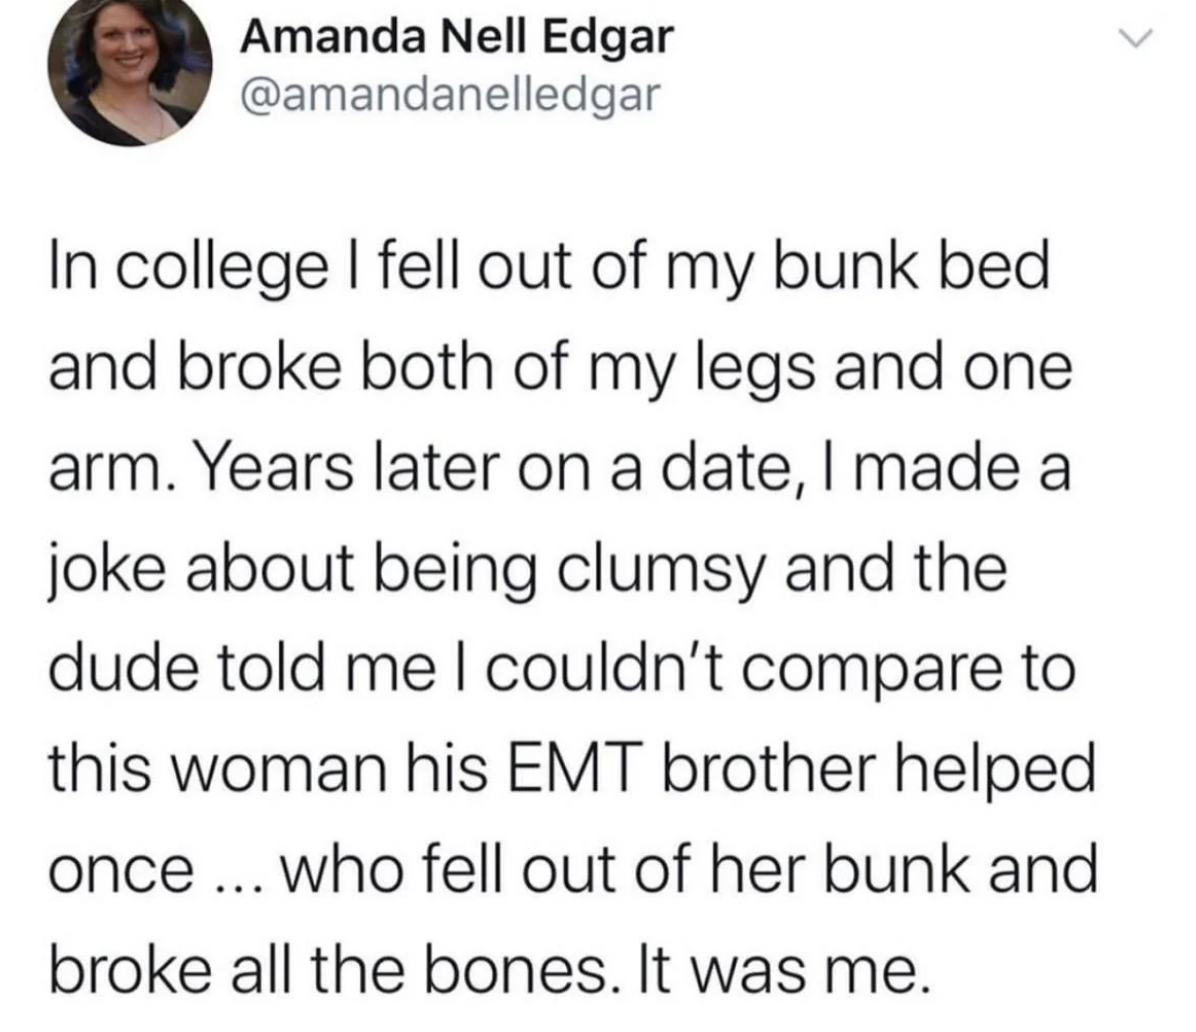 screenshot - Amanda Nell Edgar In college I fell out of my bunk bed and broke both of my legs and one arm. Years later on a date, I made a joke about being clumsy and the dude told me I couldn't compare to this woman his Emt brother helped once... who fel